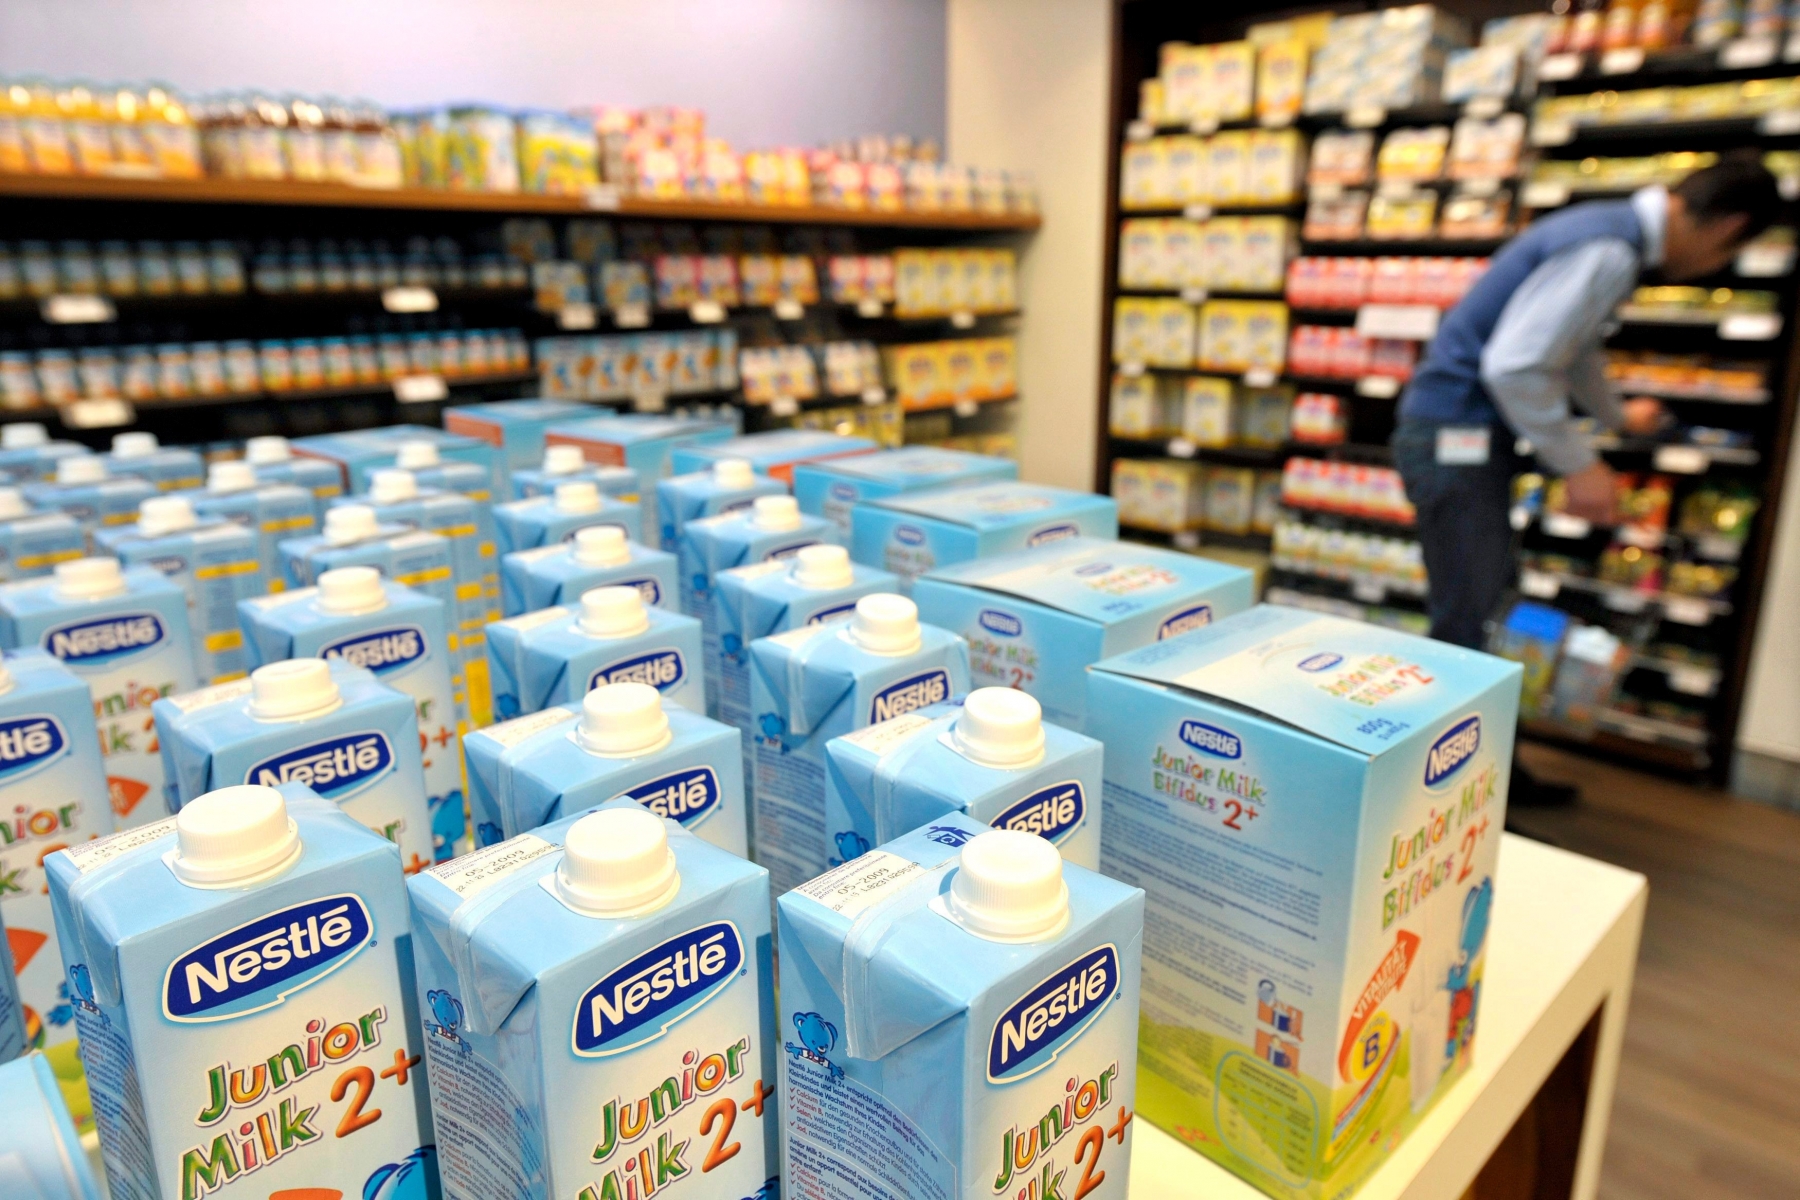 (FILE) A file photo dated  showing Nestle products at the food and drinks giant Nestle own supermarket, at the Nestle headquarters, Vevey, Switzerland. Revenues of the world's biggest food maker Nestle SA rose sharply year-on-year in emerging countries in the first three quarters, compensating lacklustre growth in crisis-hit Europe, the Swiss company said 18 October 2012. Overall sales rose to 67.6 billion Swiss francs (73.3 billion dollars), up 11 per cent from the first three quarters of last year. Excluding the effect of acquisitions and currency fluctuations, global revenues grew 6.1 per cent year-on-year, the company said. In emerging markets, this figure was 11.7 per cent, with dairy products, powder drinks and canned coffee among the most successful products in these countries. (KEYSTONE/Laurent Gillieron) FILE SWITZERLAND ECONOMY NESTLE